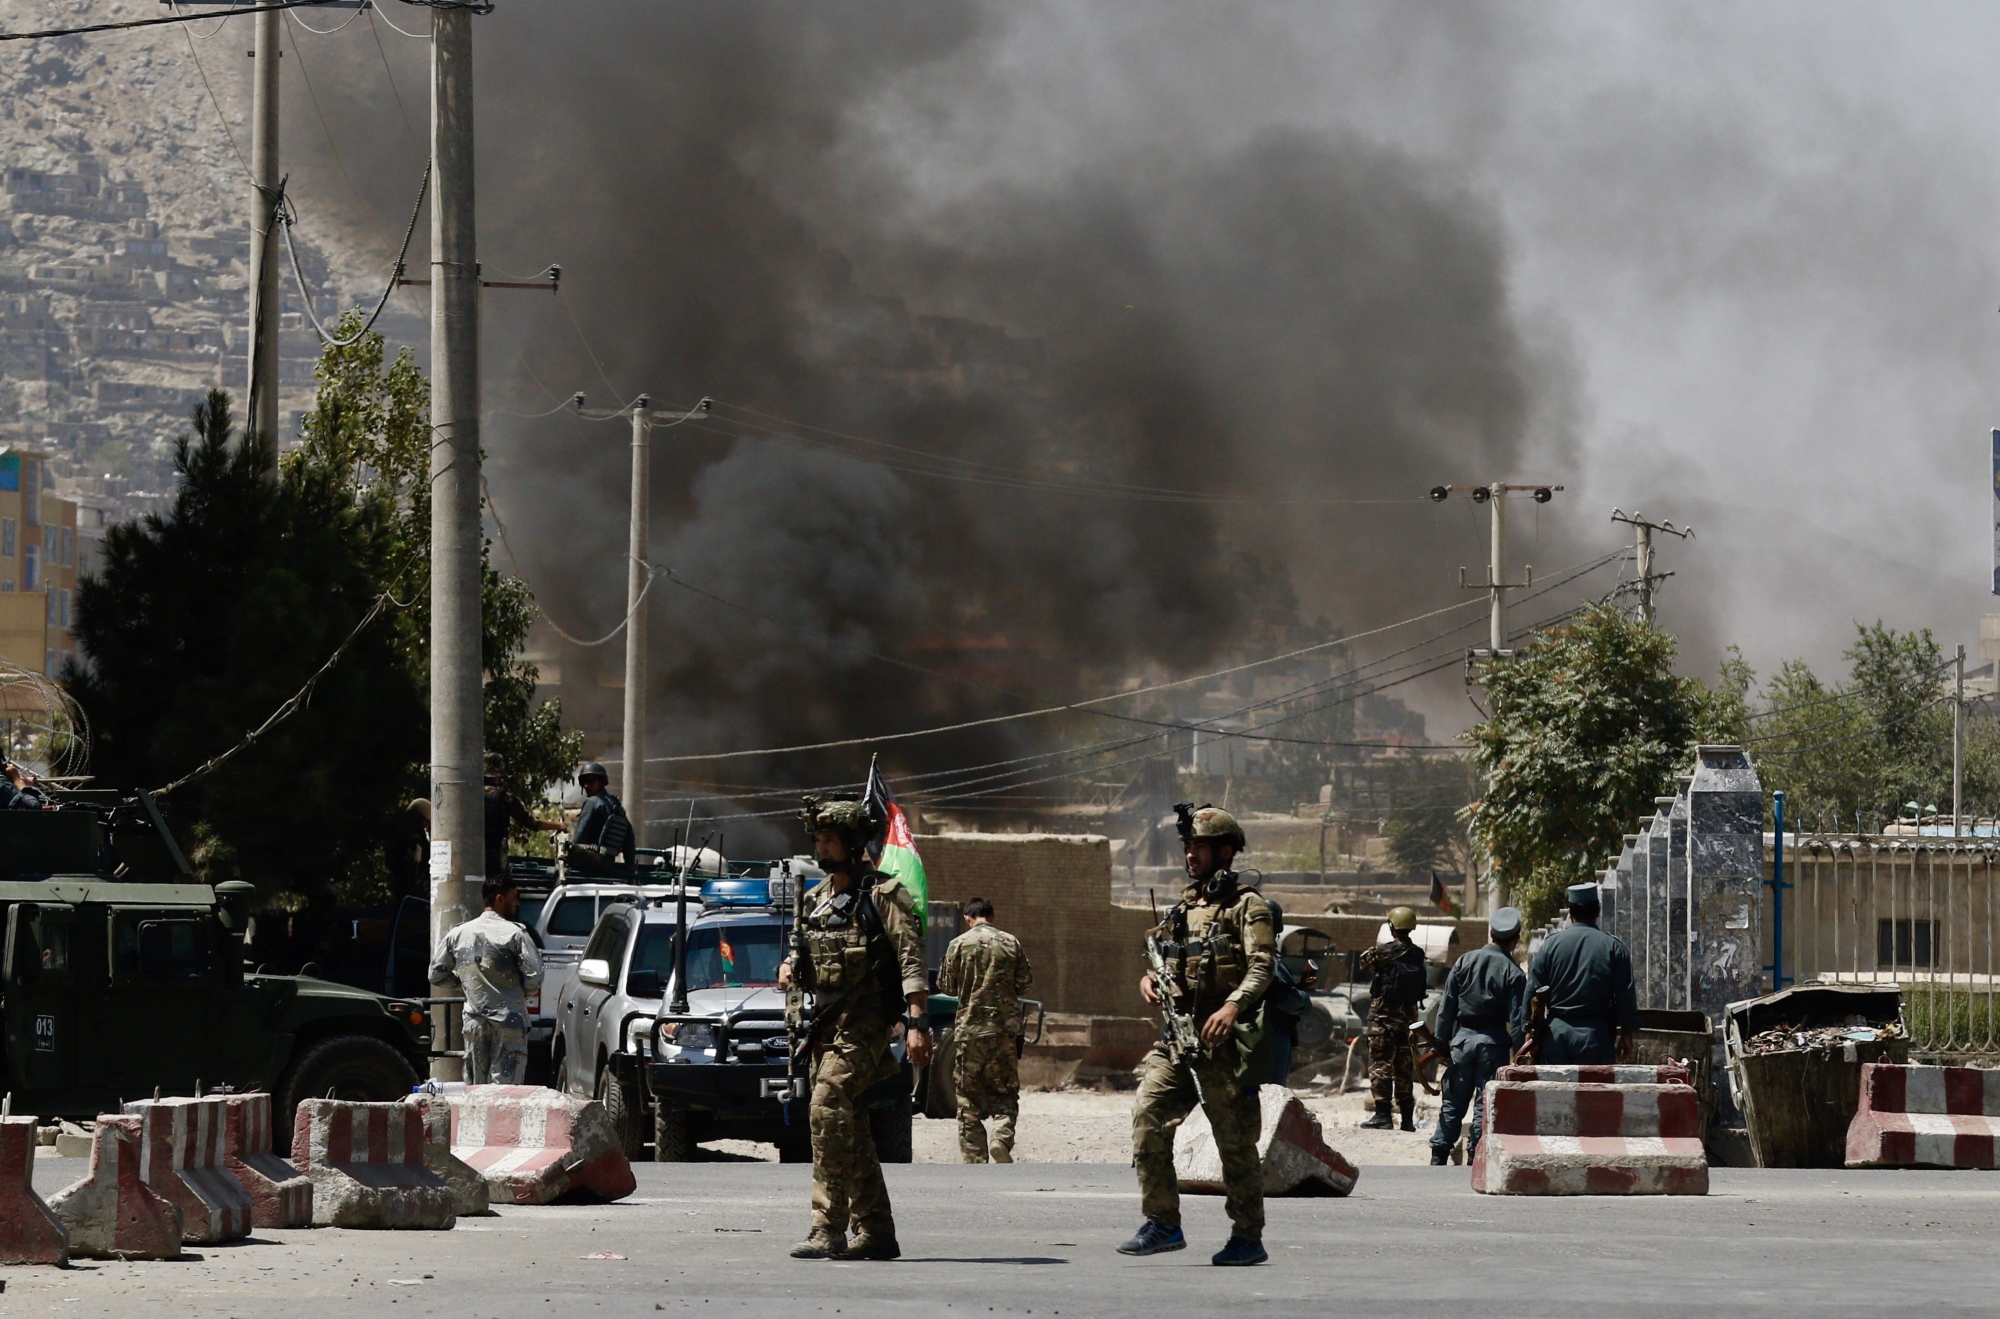 epa06961841 Smoke billows after armed militants attacked the area close to the Presidential place and other government offices, during Eid al-Adha celebrations in Kabul, Afghanistan, 21 August 2018. Afghan security forces are engaged in the operation to clear the area of militants.  EPA/HEDAYATULLAH AMID AFGHANISTAN CONFLICTS EID AL-ADHA ATTACK